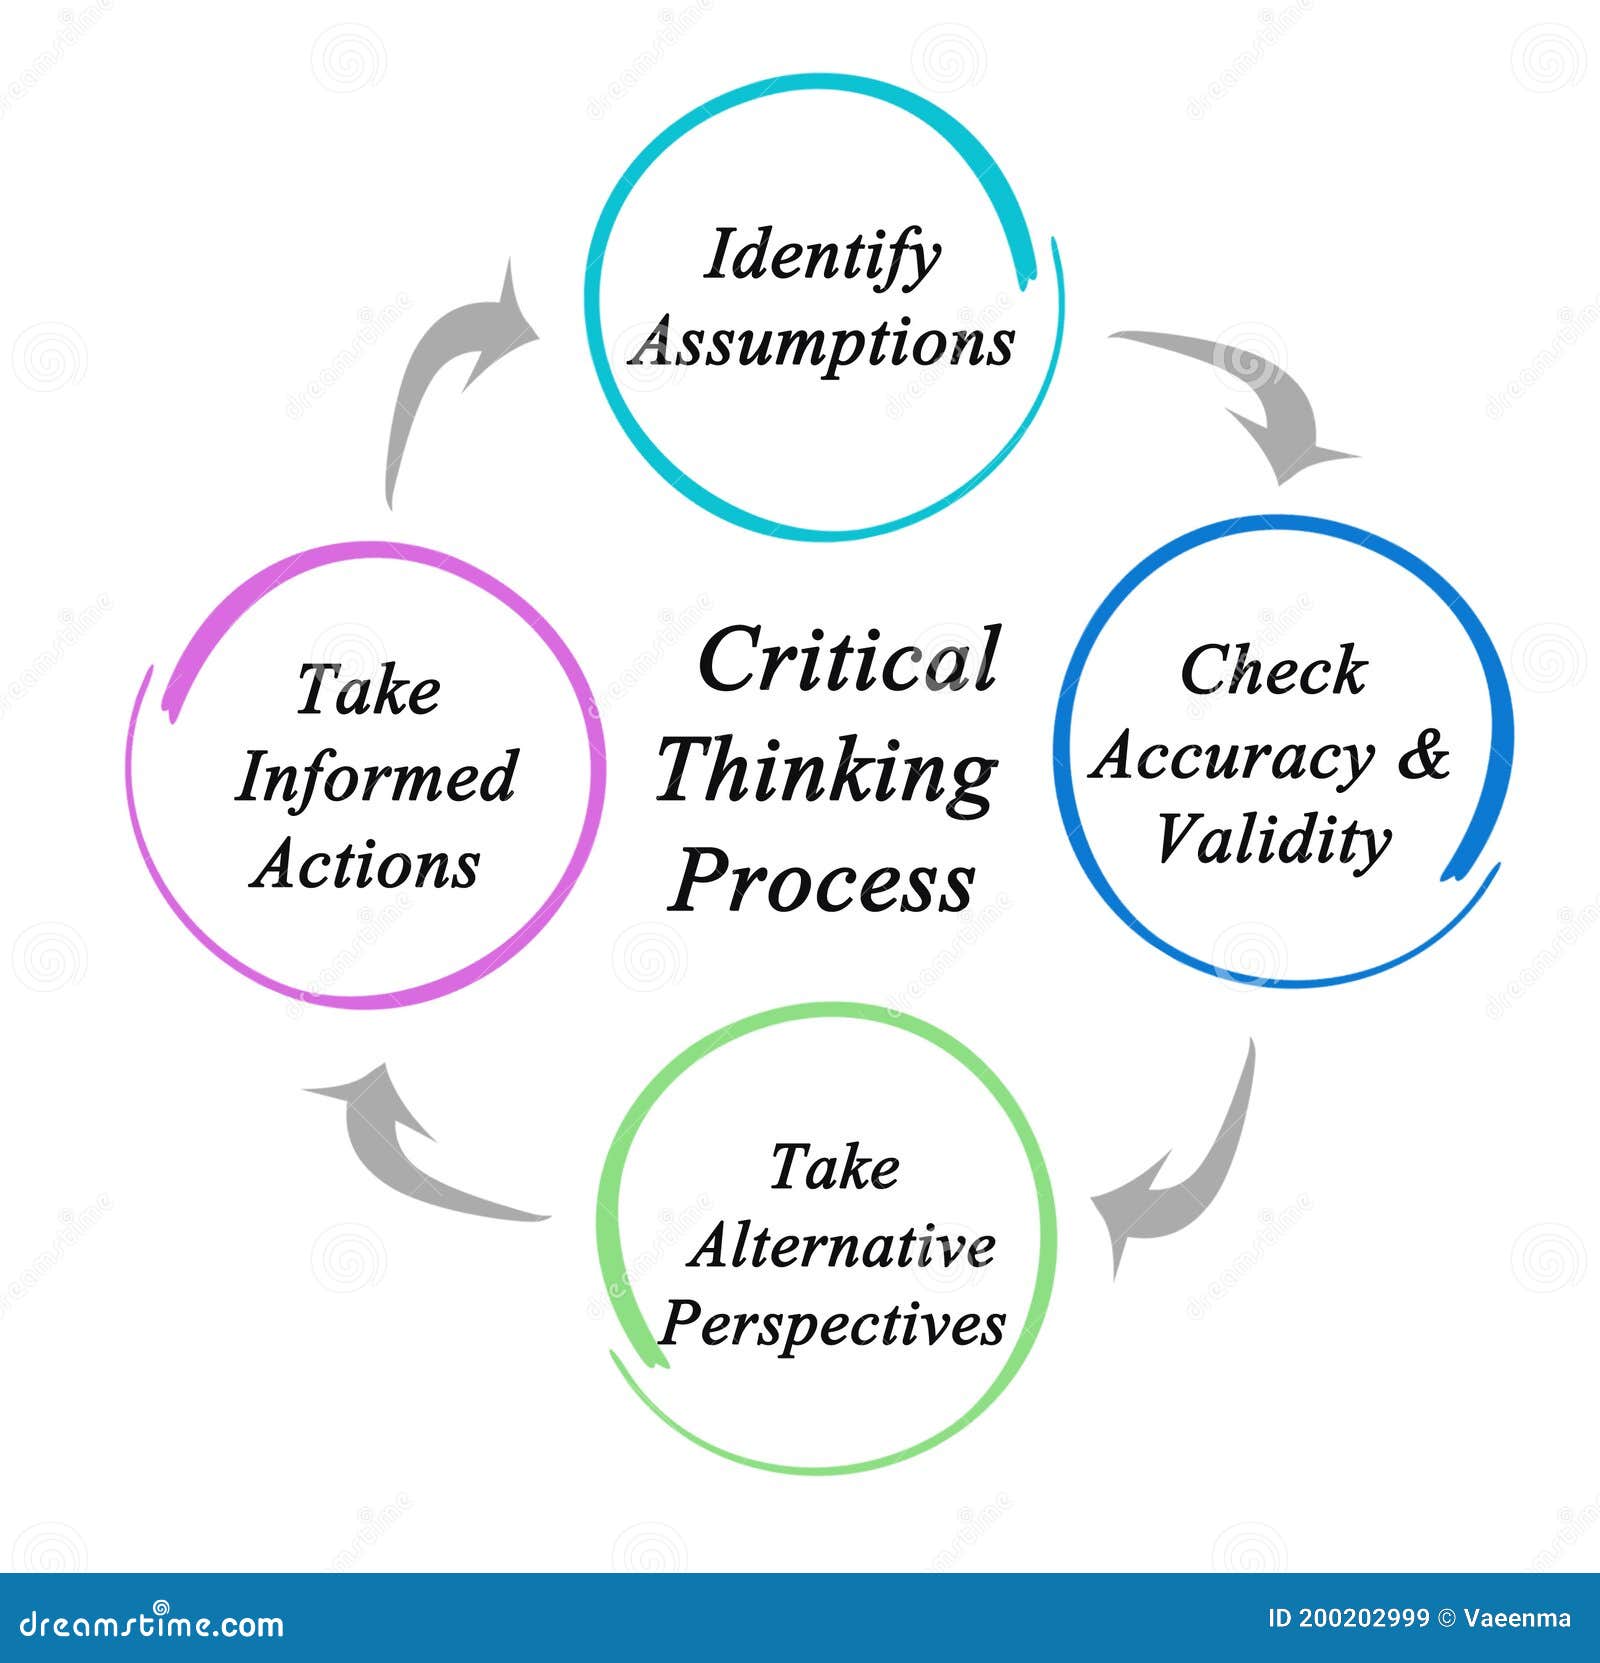 about critical thinking process